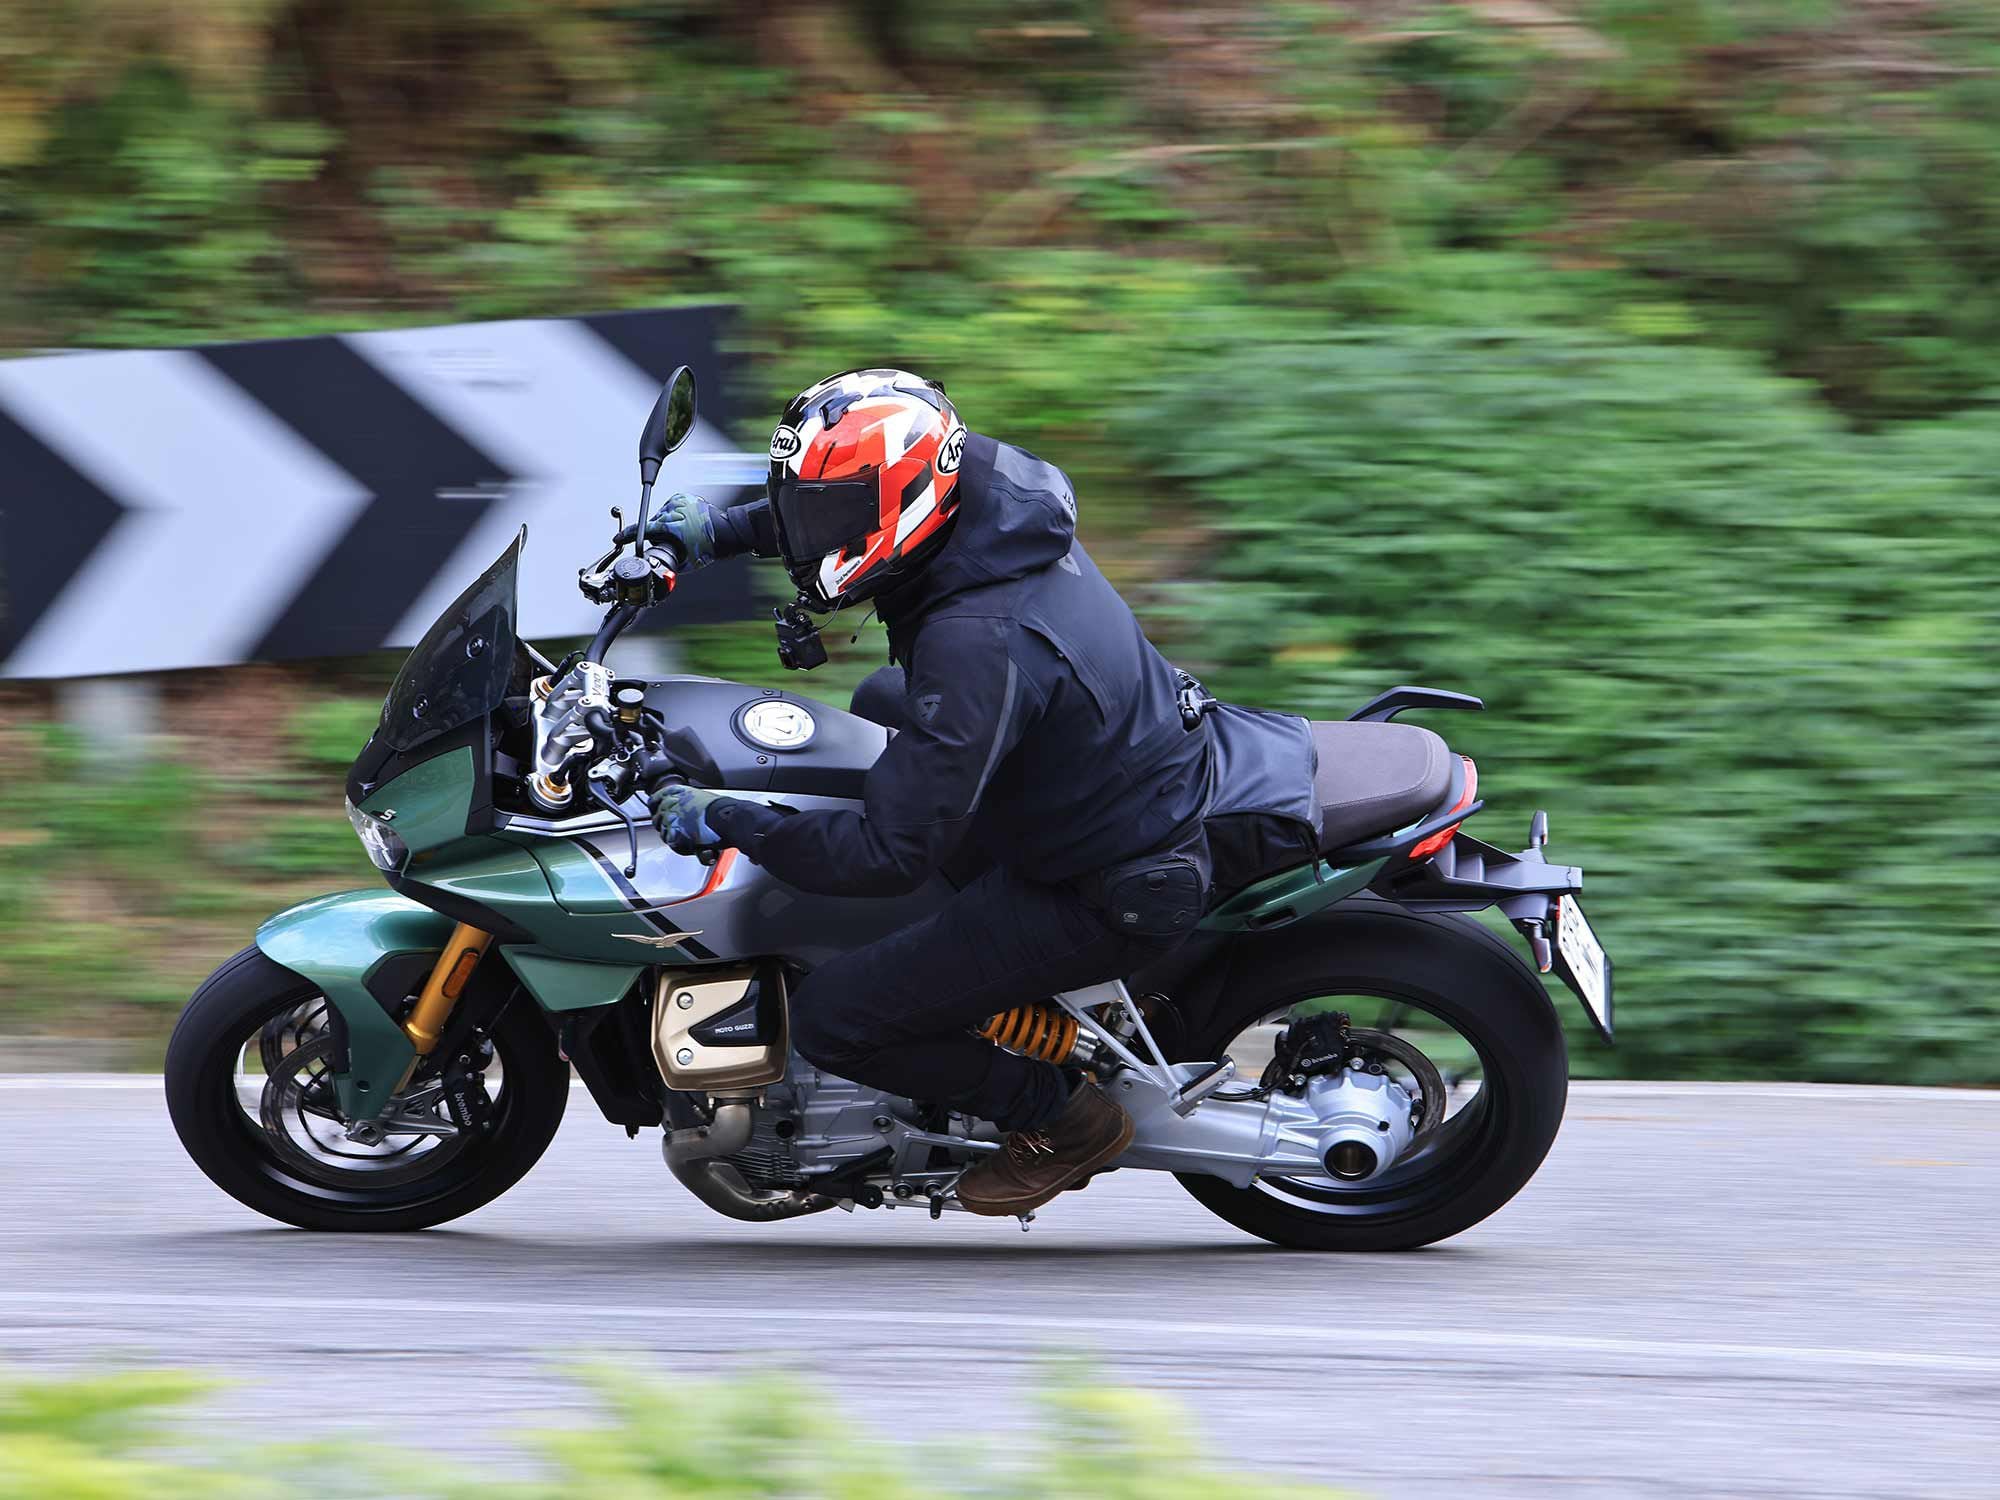 We try out Moto Guzzi’s all-new V100 Mandello S from the official international press introduction in Italy.